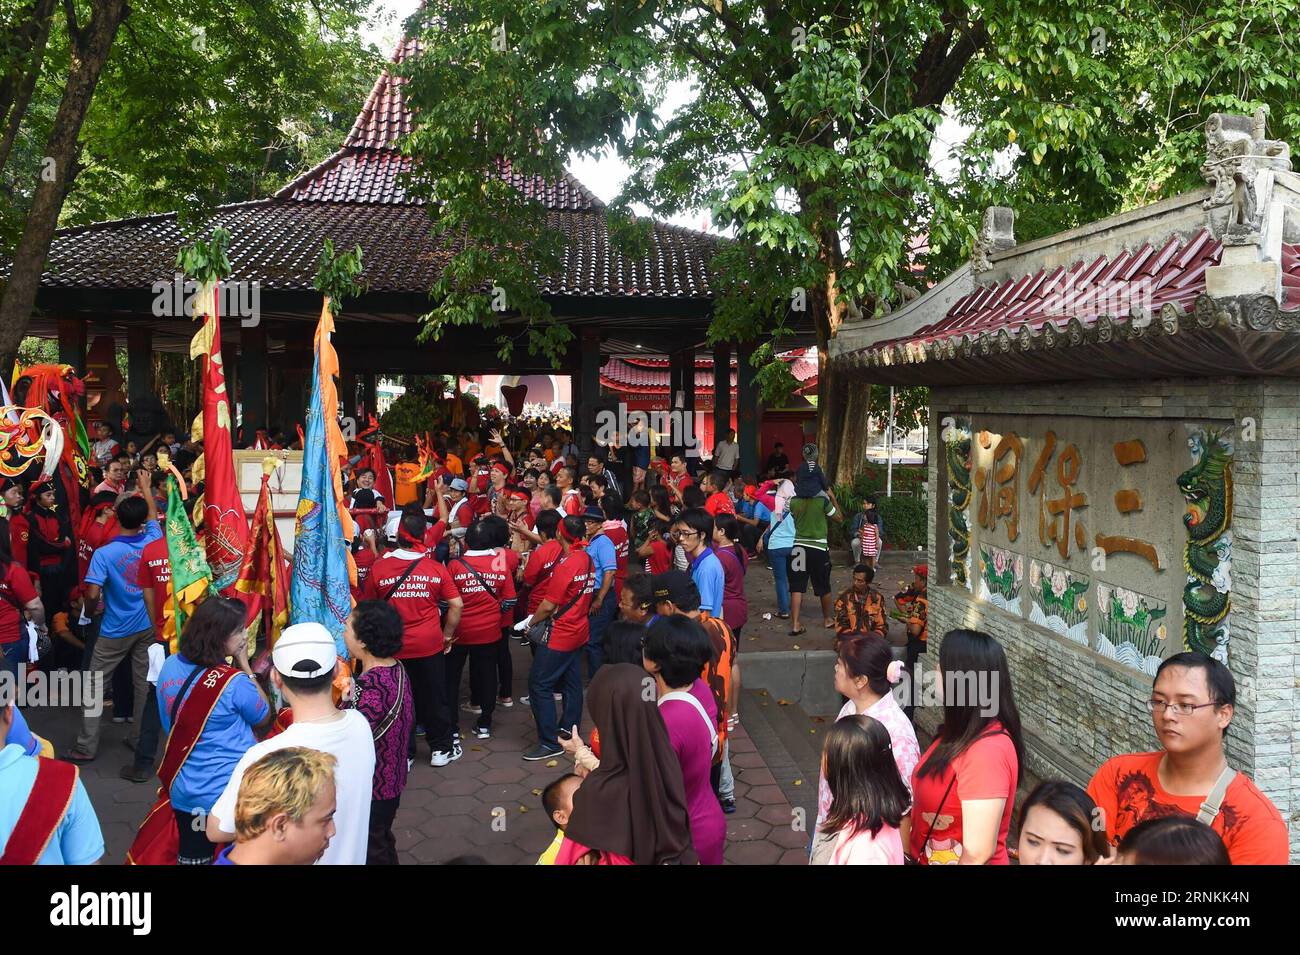 (170407) -- SEMARANG(INDONESIA), April 7, 2017 -- Photo taken on July 31, 2016 shows a ceremony to commemorate the Chinese Ming Dynasty (1368-1644) navigator Zheng He s arrival at Semarang at the Sam Poo Kong Temple in Semarang, Indonesia. Chinese navy explorer Zheng He who visited the Central Java Province s port city of Semarang 600 years ago has an enduring legacy in the capital of the province. Arriving here at the beginning of the 15th century, Zheng He made a cave on the Simongan Hill as his temporary abode and repaired his ships. During his stay, Zheng He built a mosque and set up a Chi Stock Photo